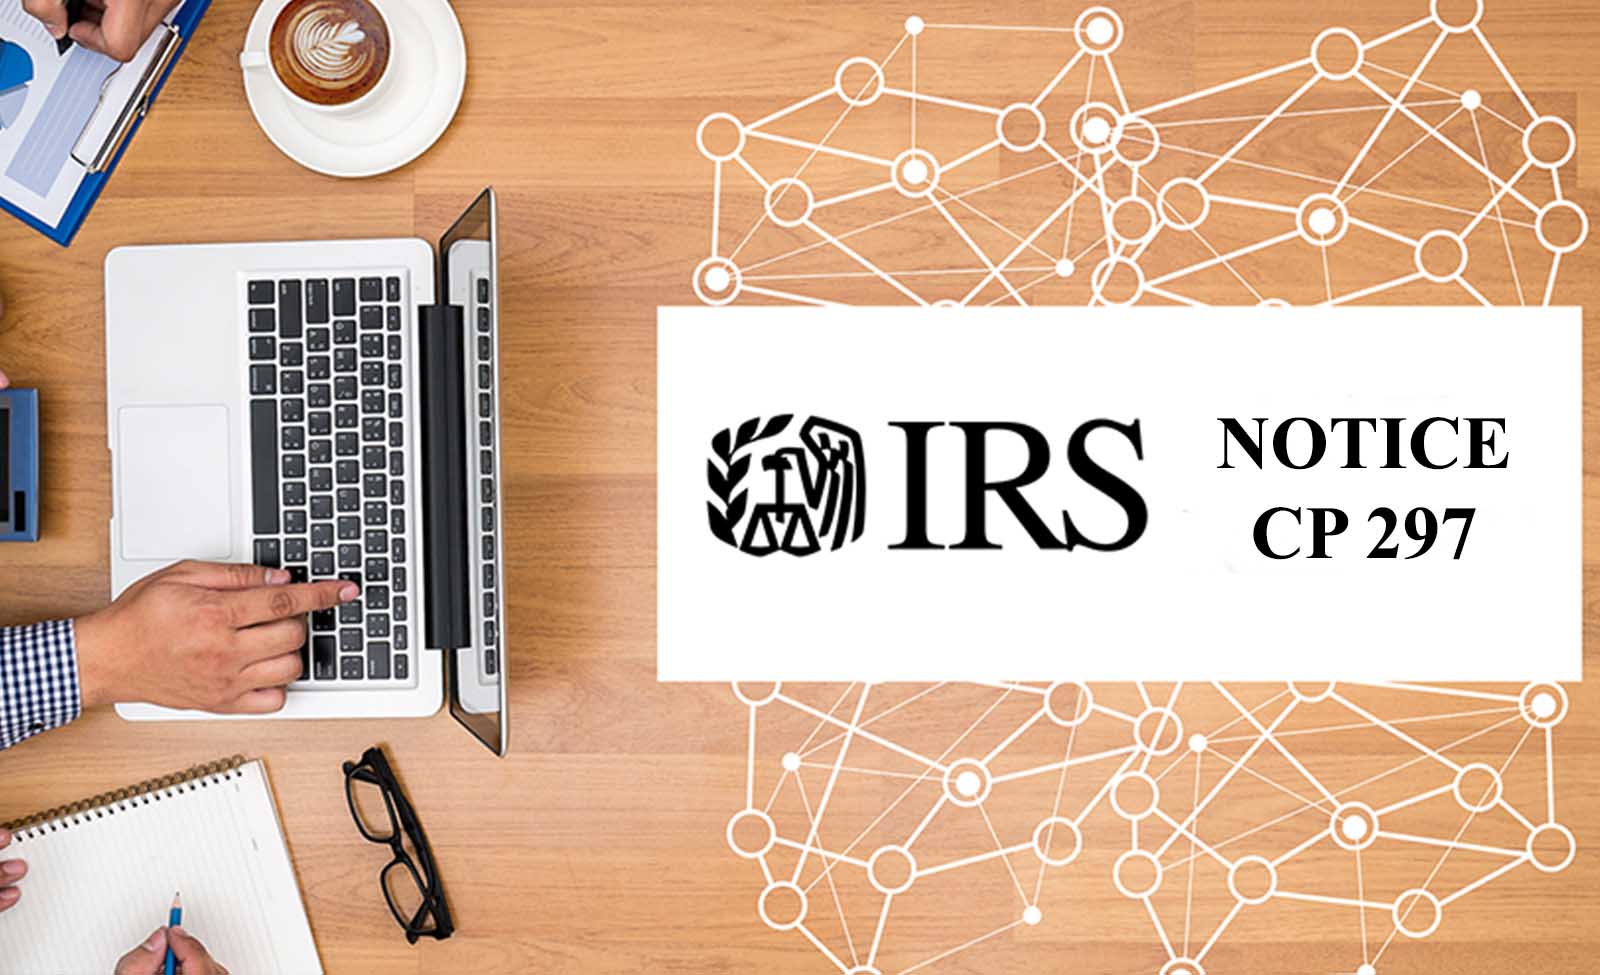 How to Respond to IRS Notice of Intent to Levy (CP 297)